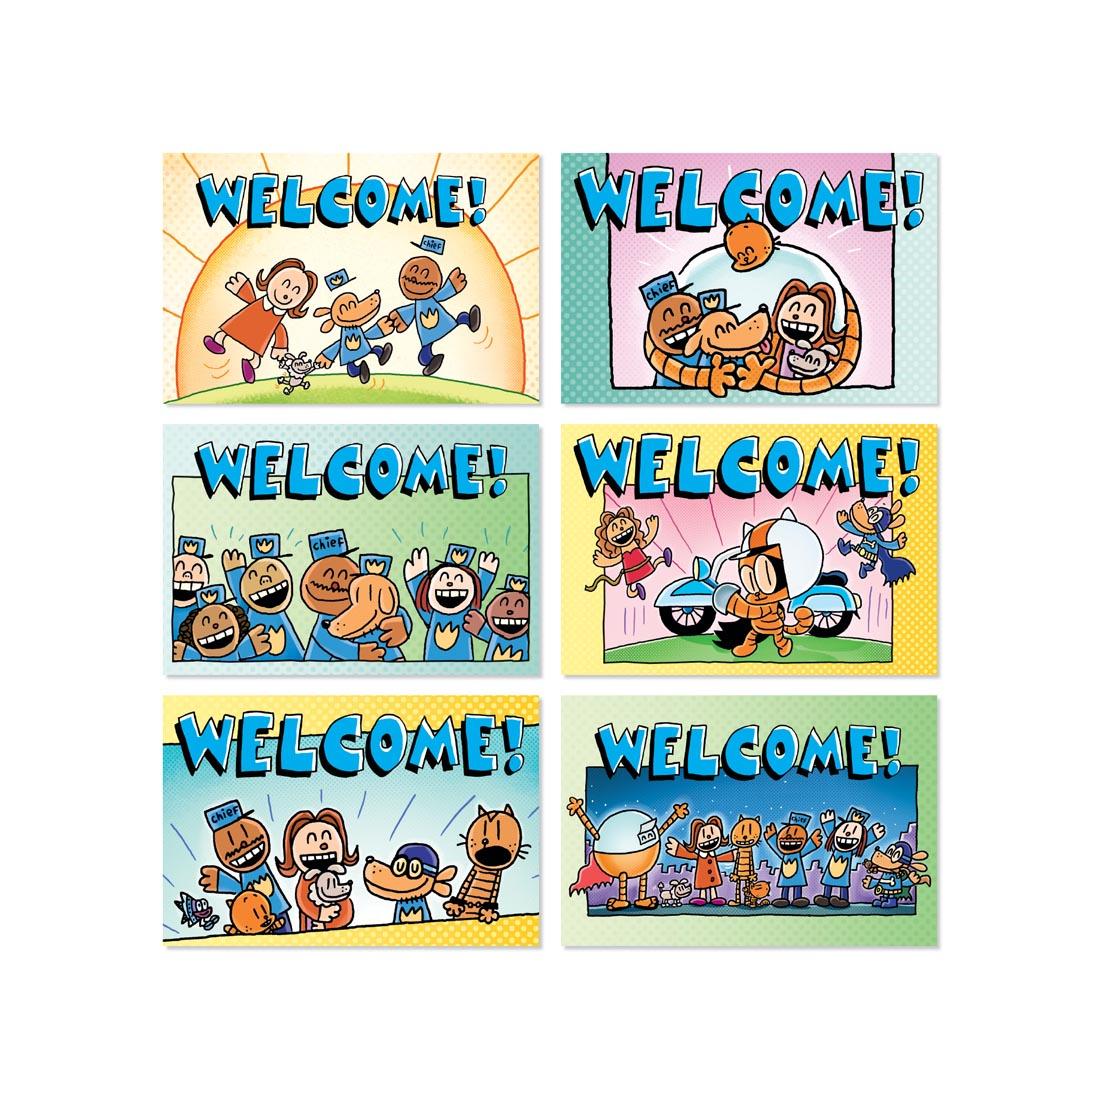 Dog Man Welcome Postcards by Scholastic Teaching Resources